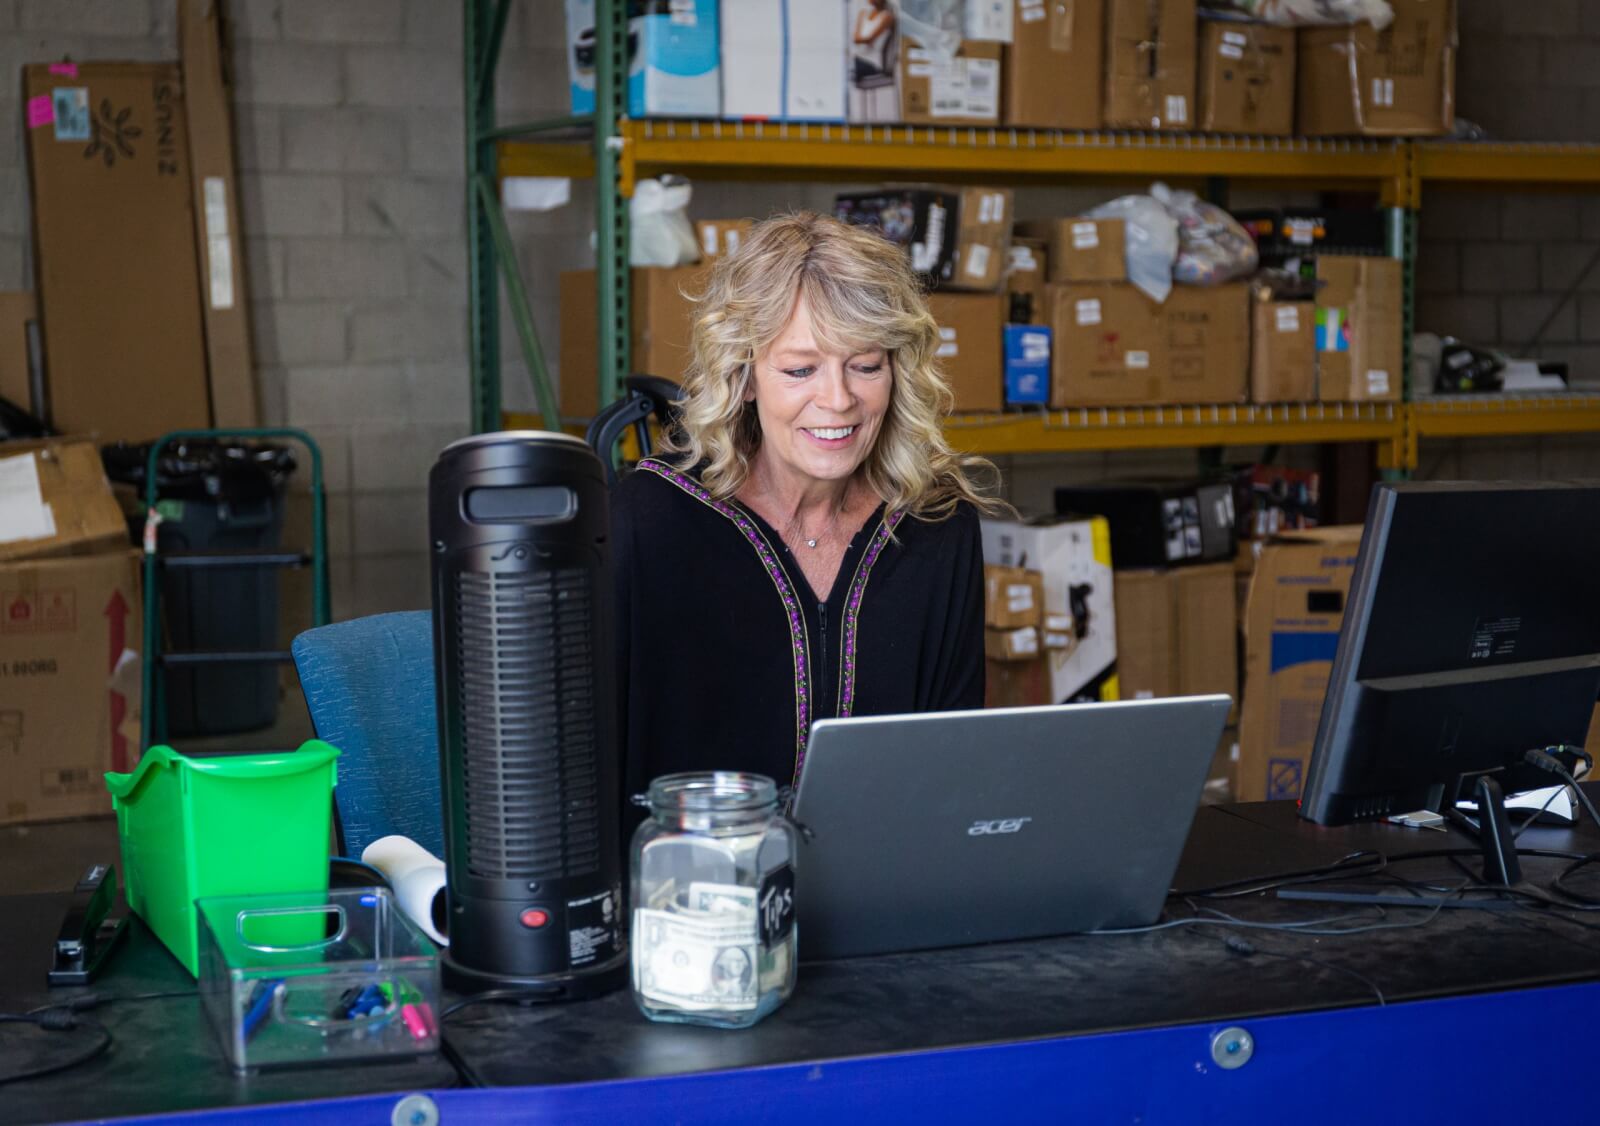 Blonde woman in a black top typing on a laptop in a warehouse.